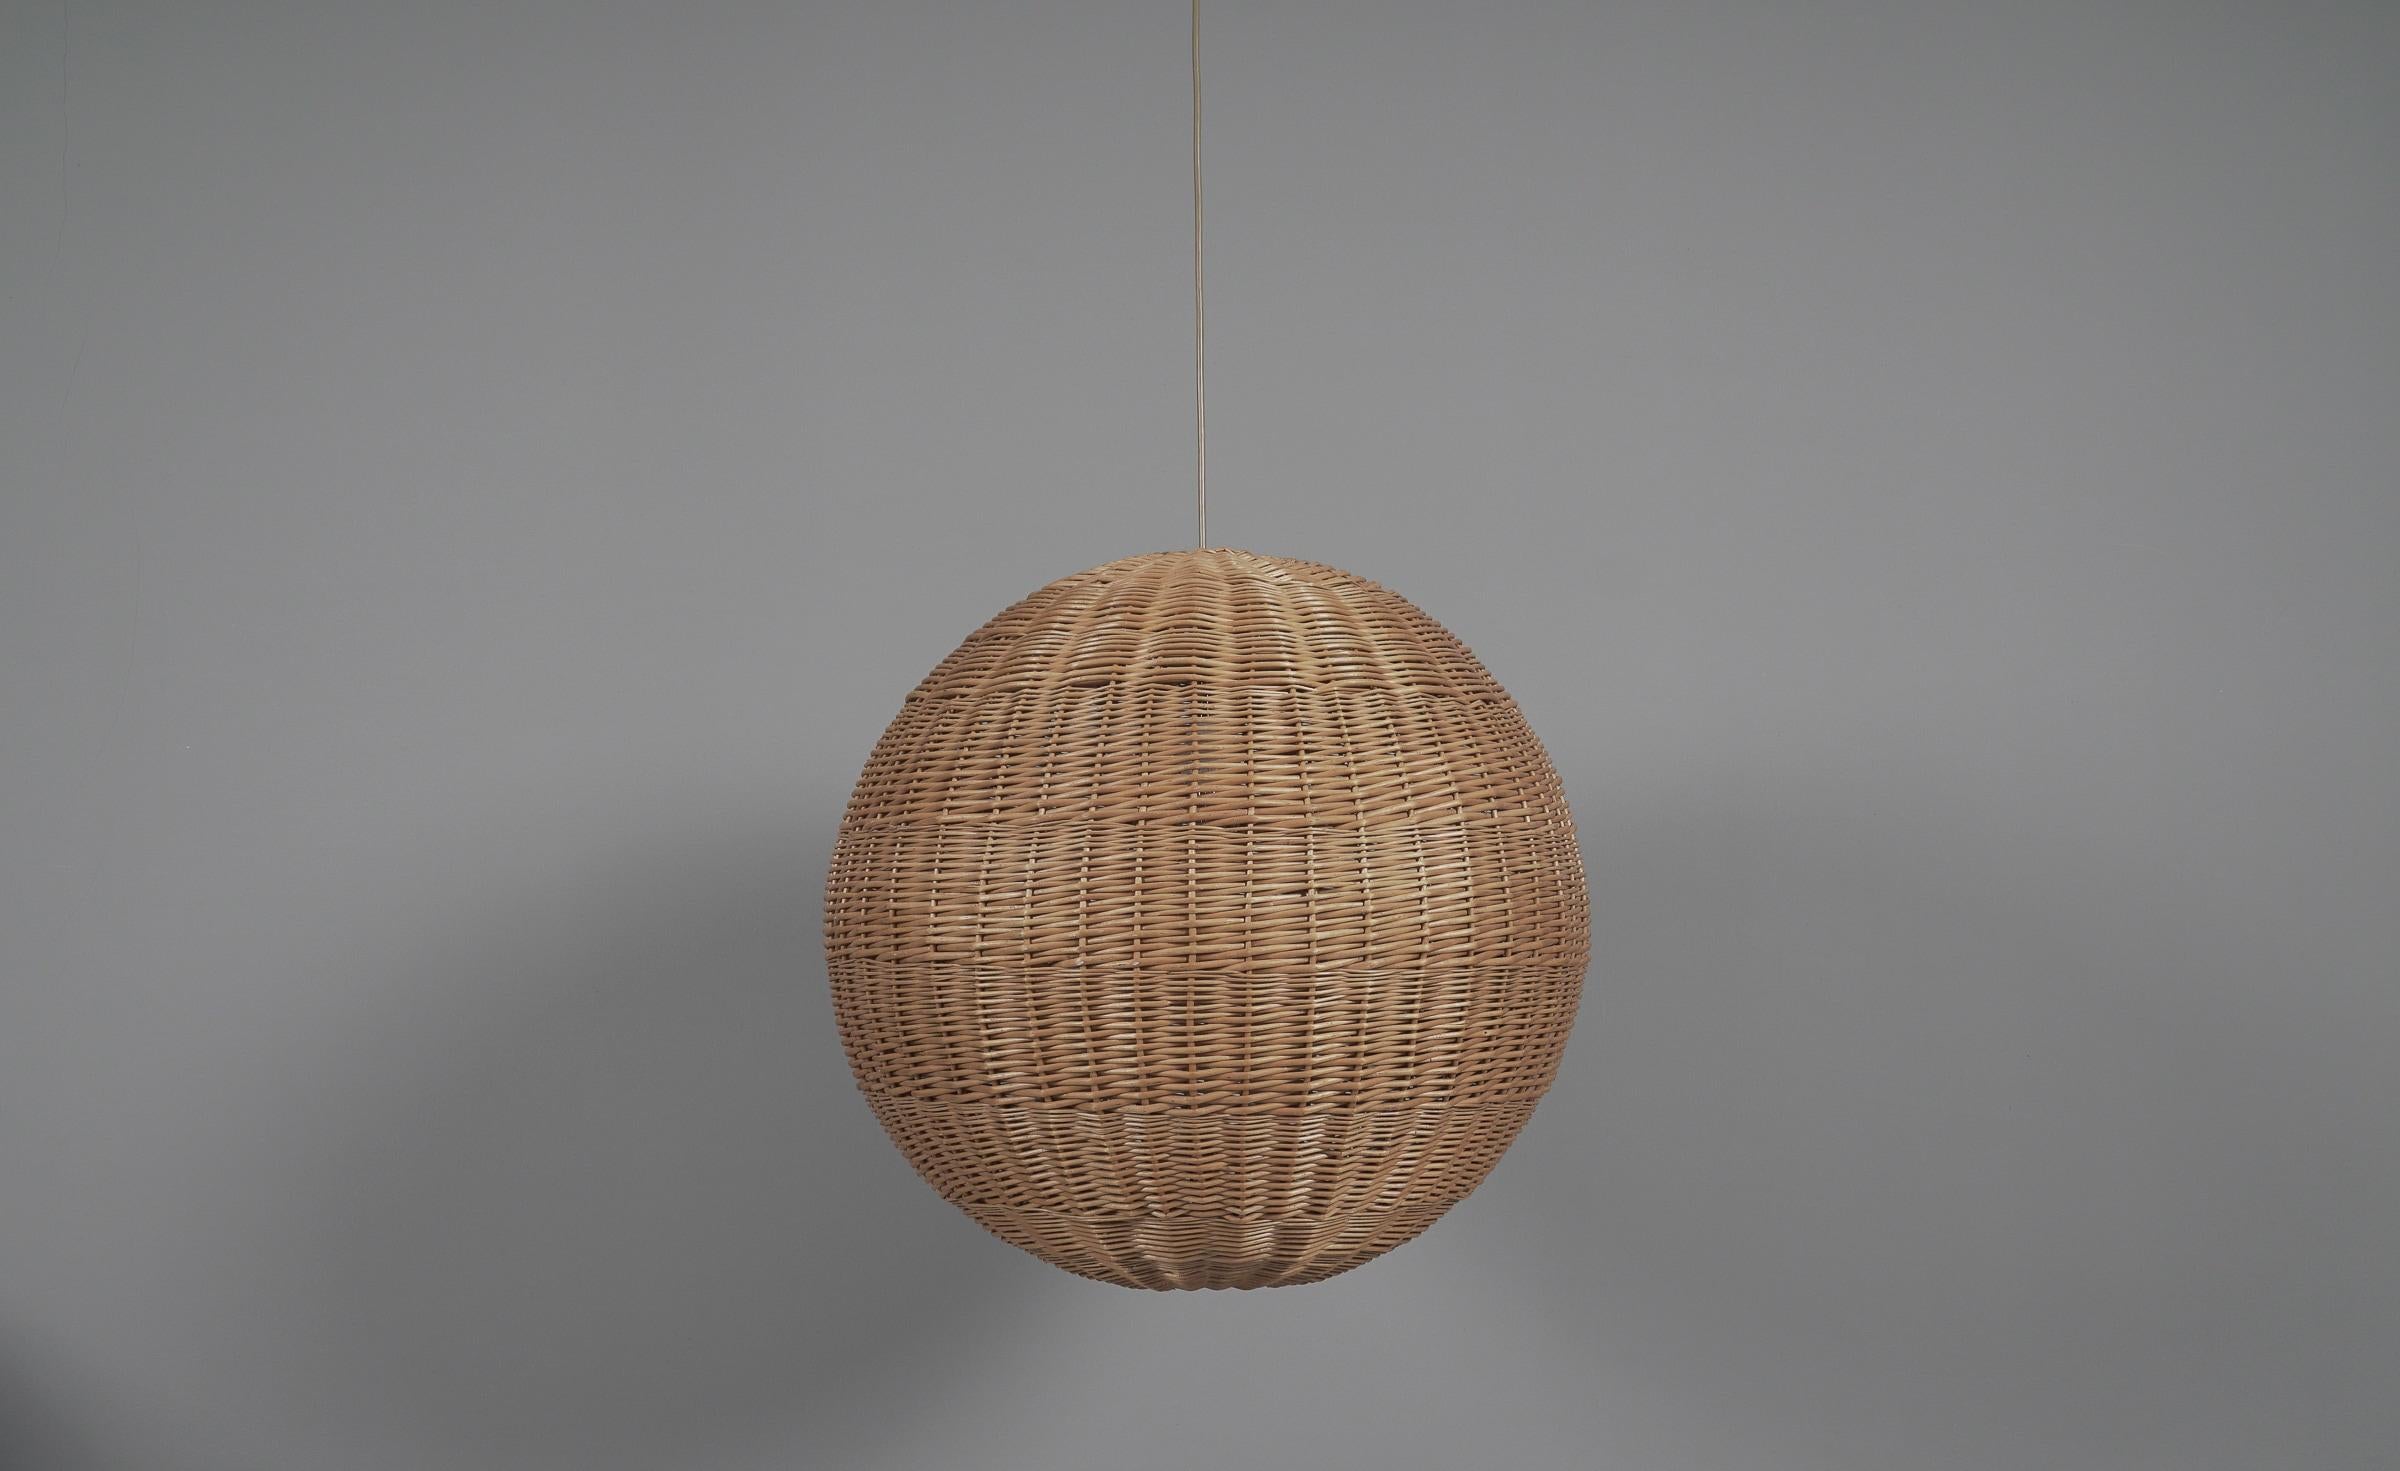 Huge and rare decorative Mid-Century Modern pendant lamp. Designed and manufactured probably in Scandinavia, 1960s.

The lamp can be adjusted from 80cm to a height of 185cm.

Executed in rattan and wood, the pendant lamp comes with 1 x E27 / E26